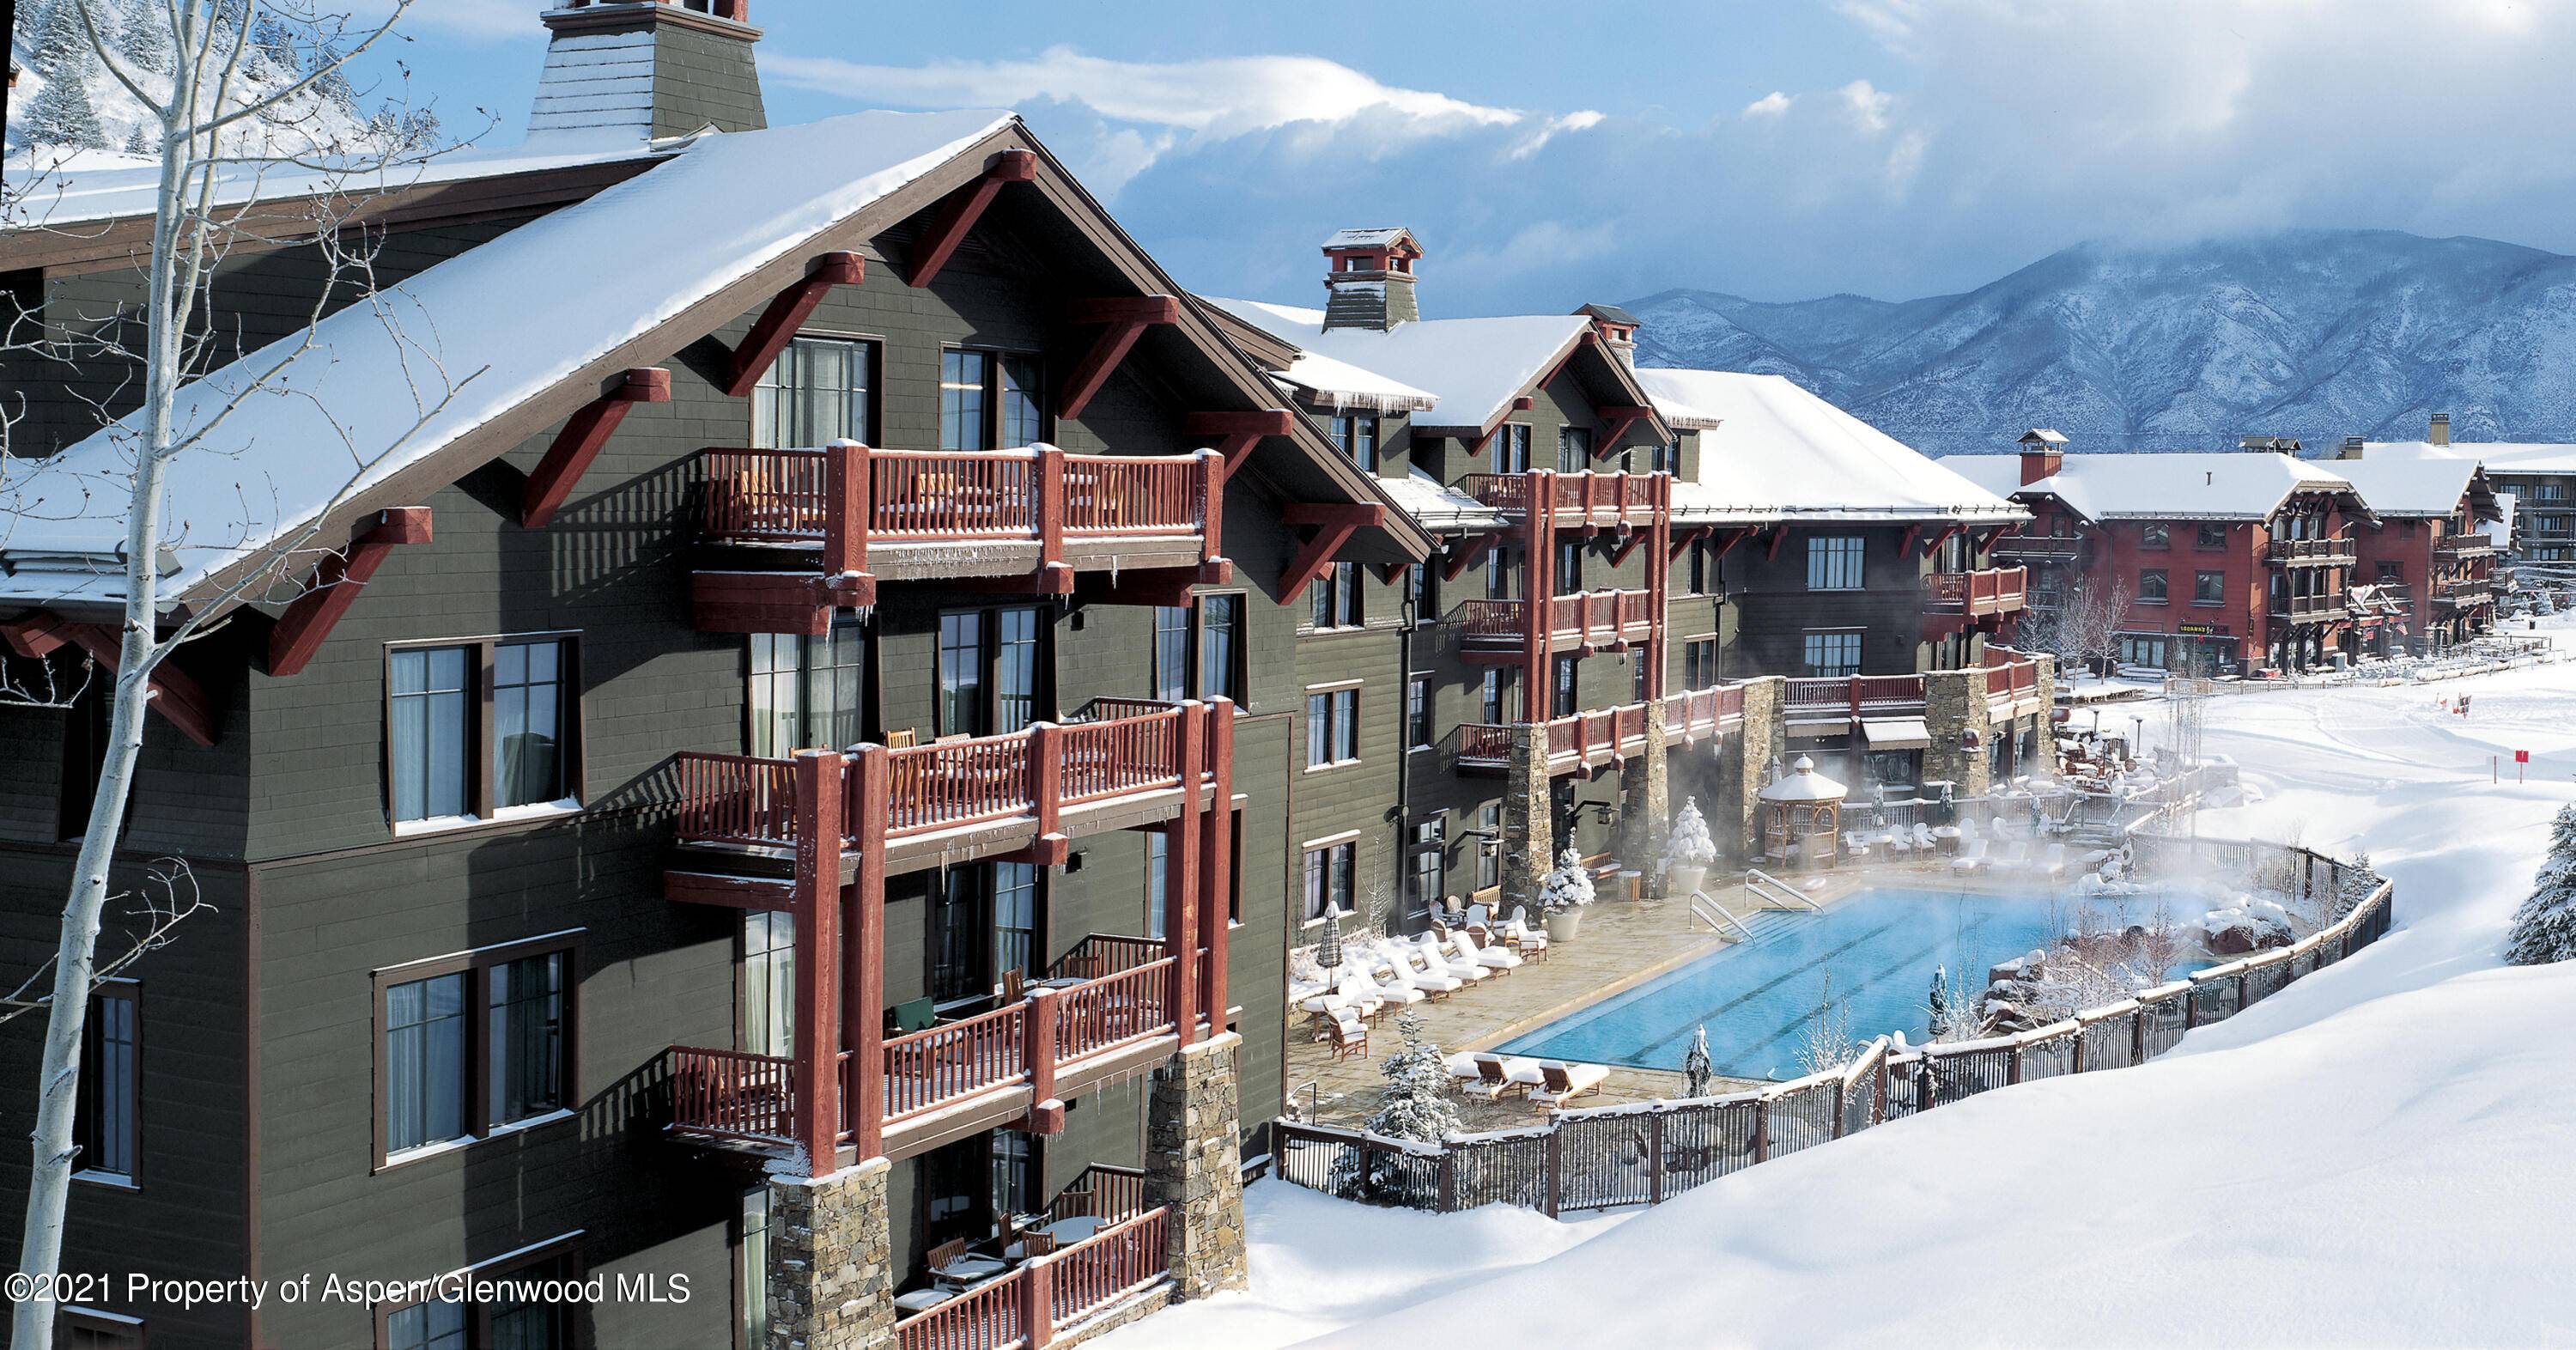 1 12 interest in a luxury condominium right at the base of Highlands Ski Area.